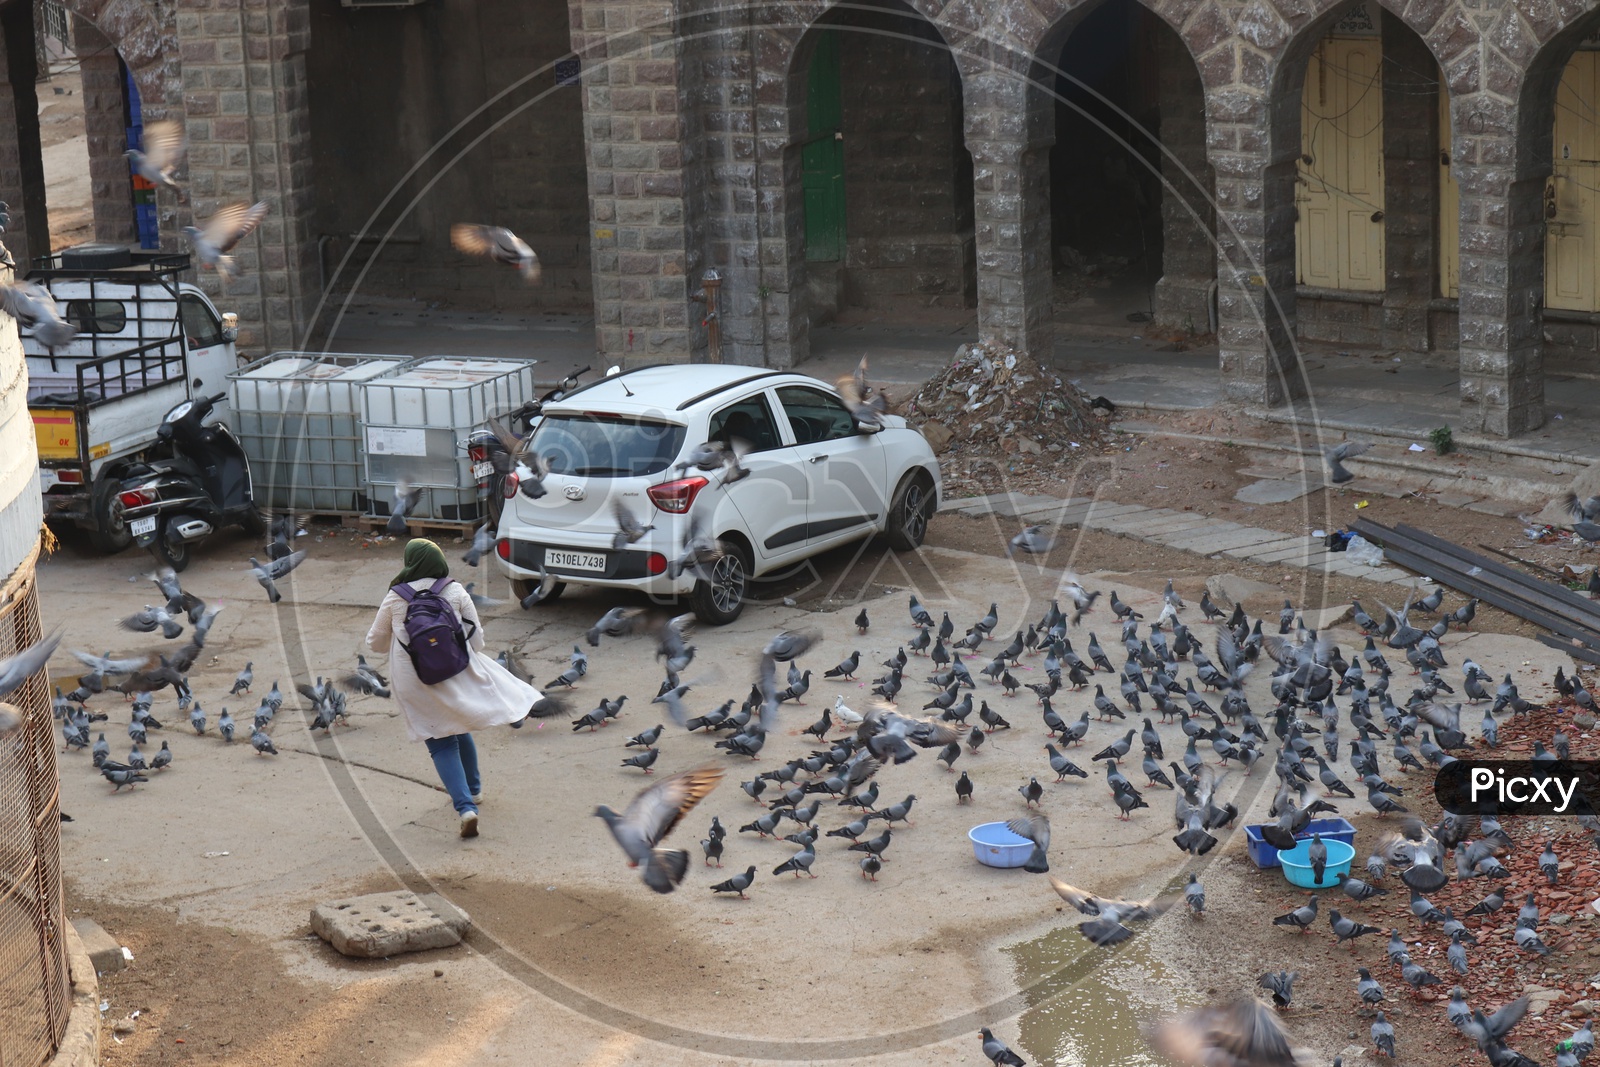 Pigeons Feeding As a Group